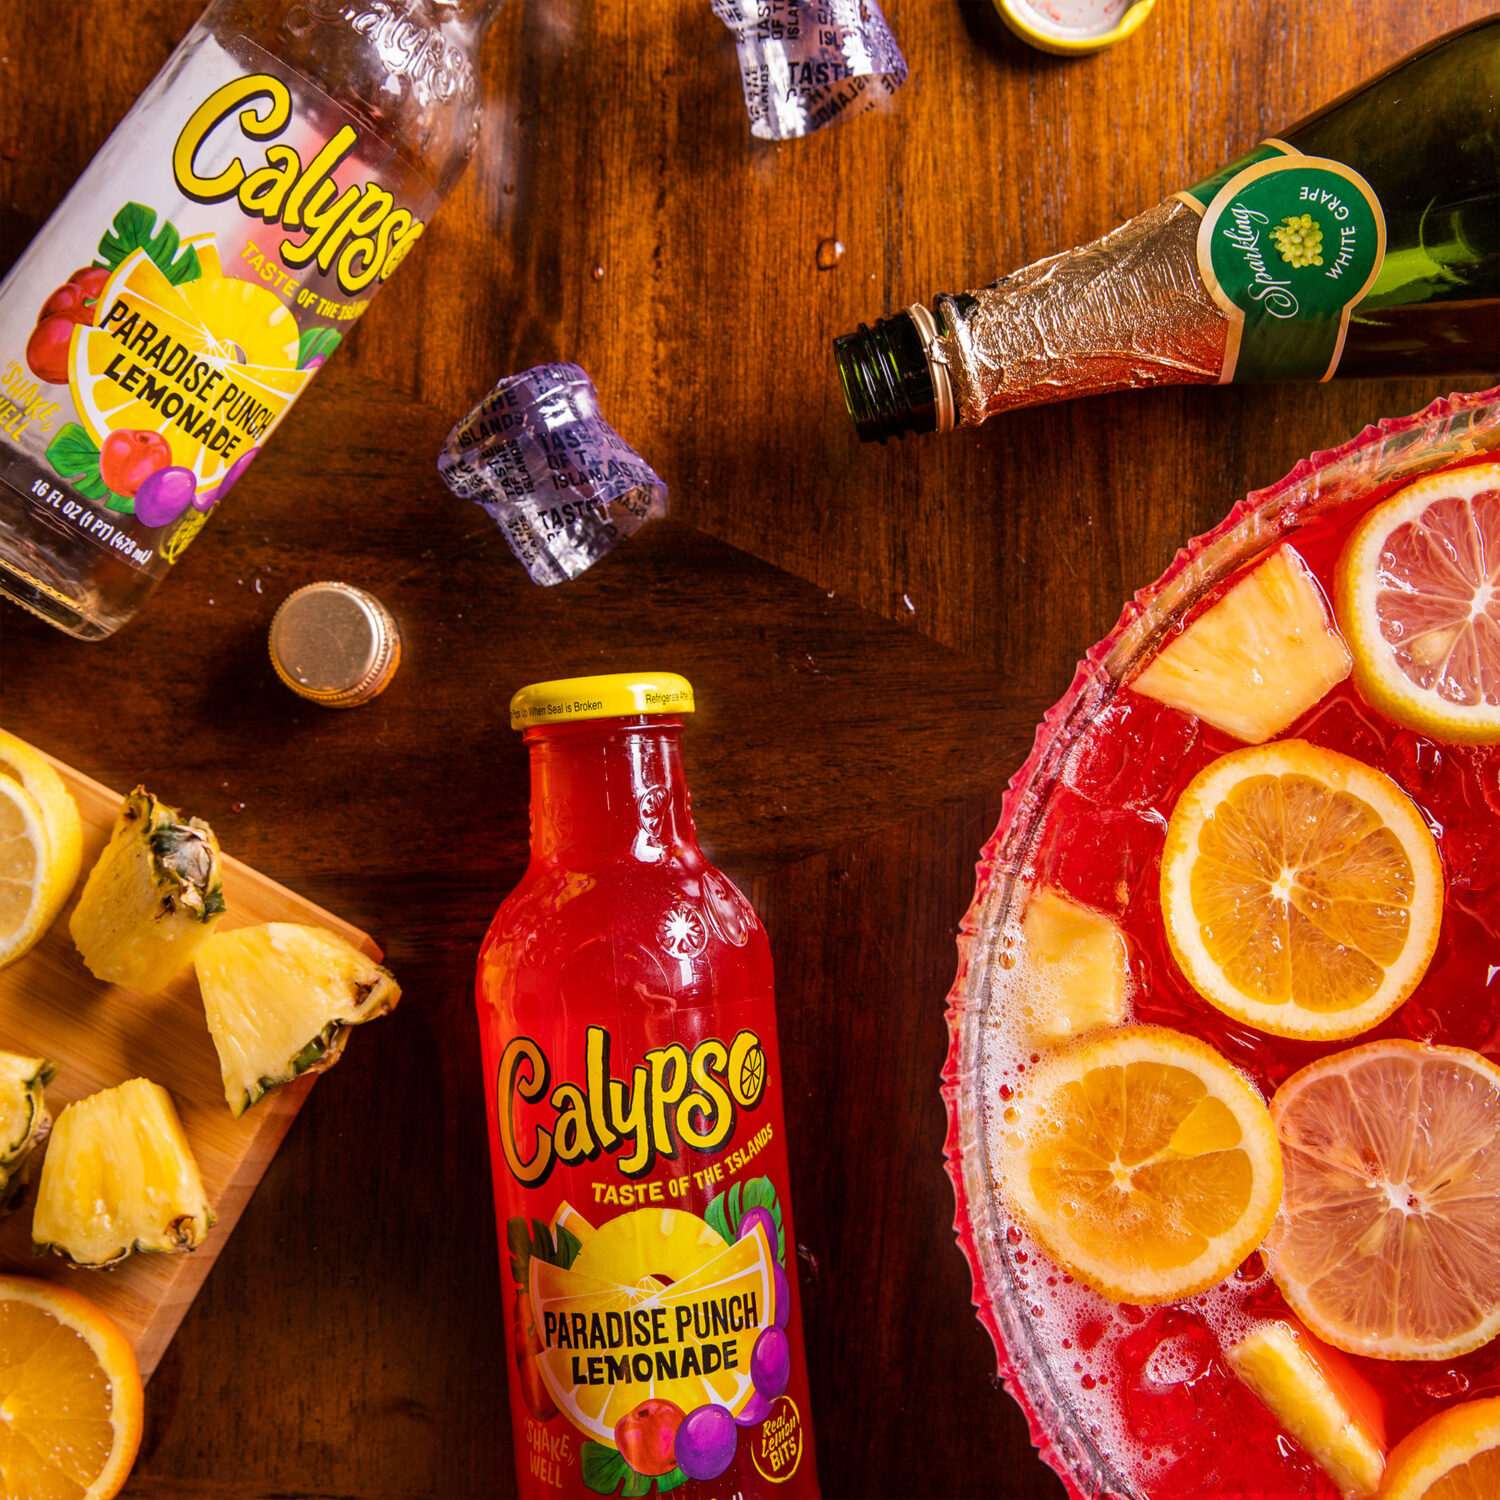 A punch bowl with oranges, pineapples, and lemons next to a bottle of champagne and Calypso Paradise Punch Lemonade.